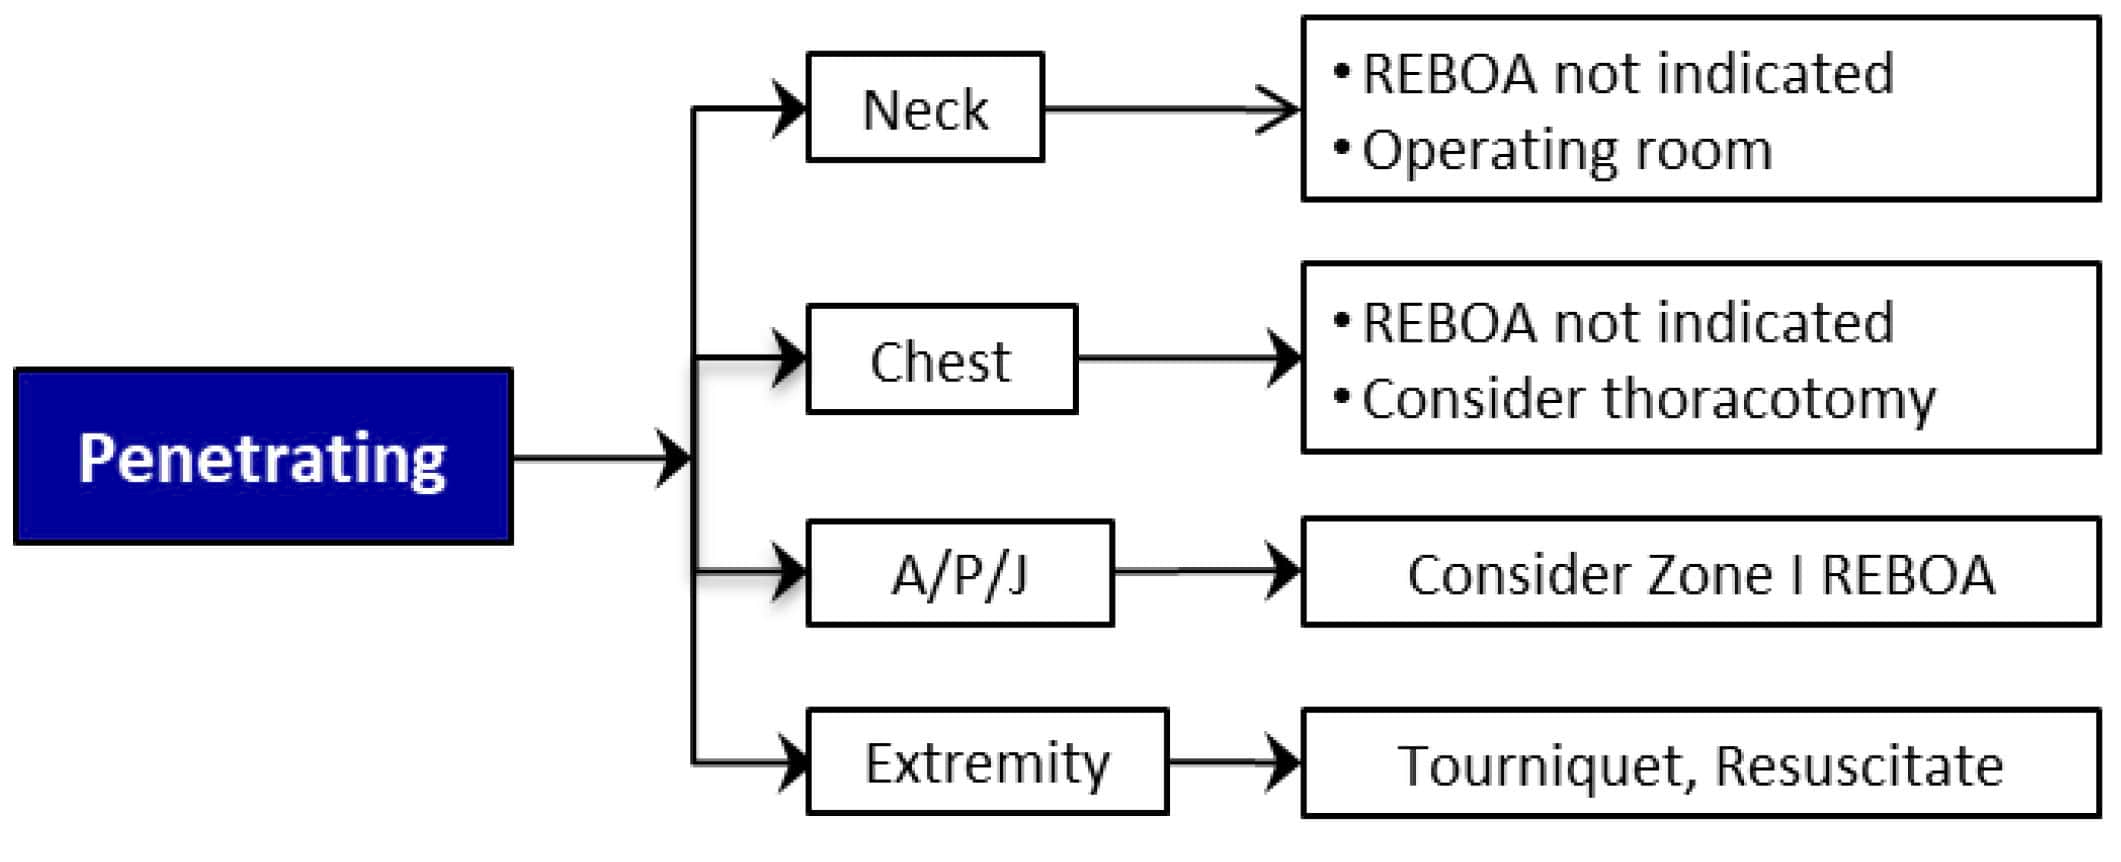 Algorithm For The Use of REBOA For Profound Shock: Penetrating